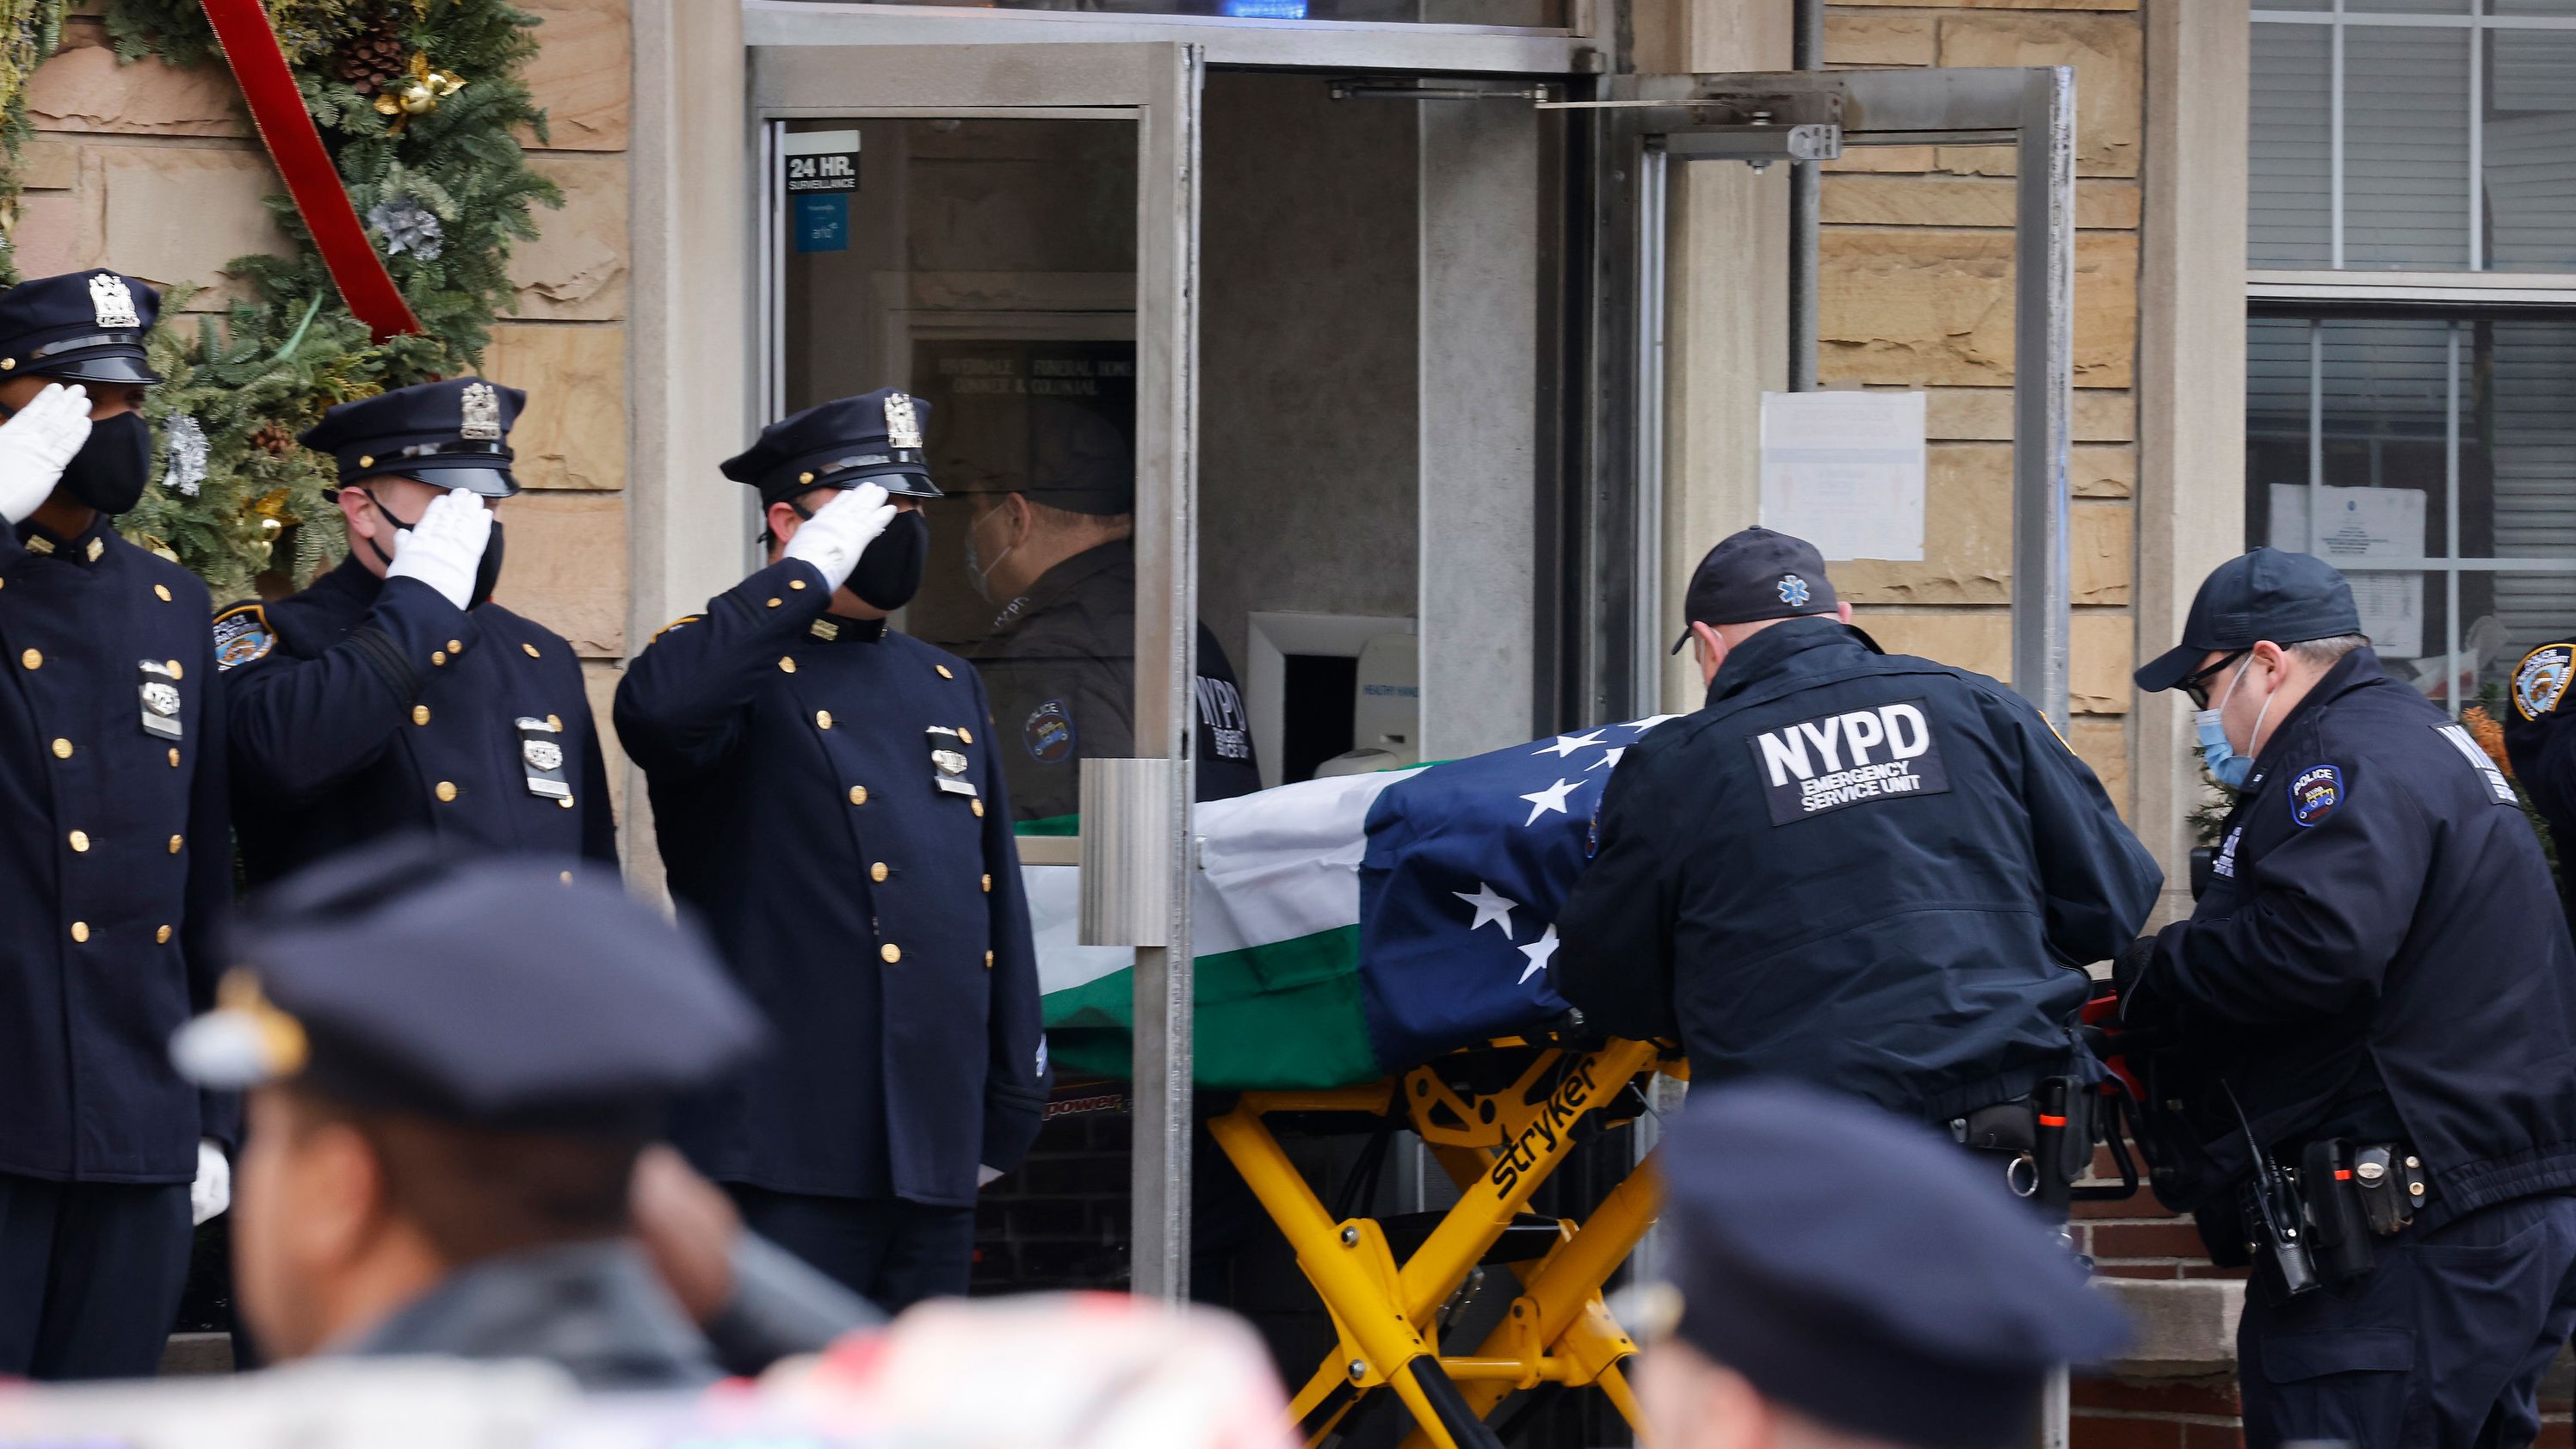 Rivera's body is brought into a funeral home on January 23.